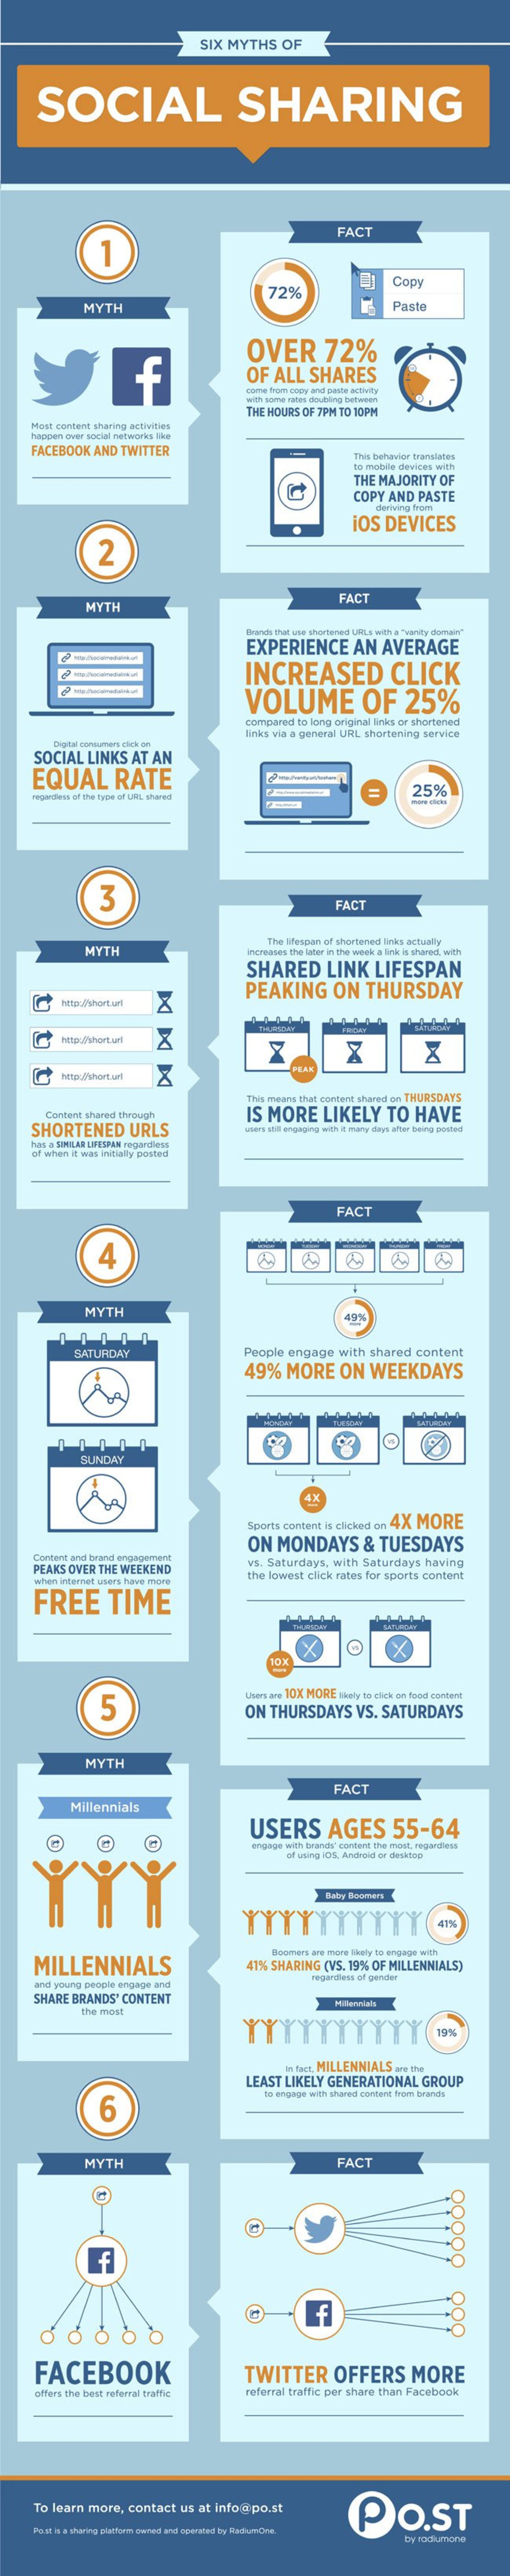 6 myths of social sharing (infographic) - VentureBeat | The MarTech Digest | Scoop.it